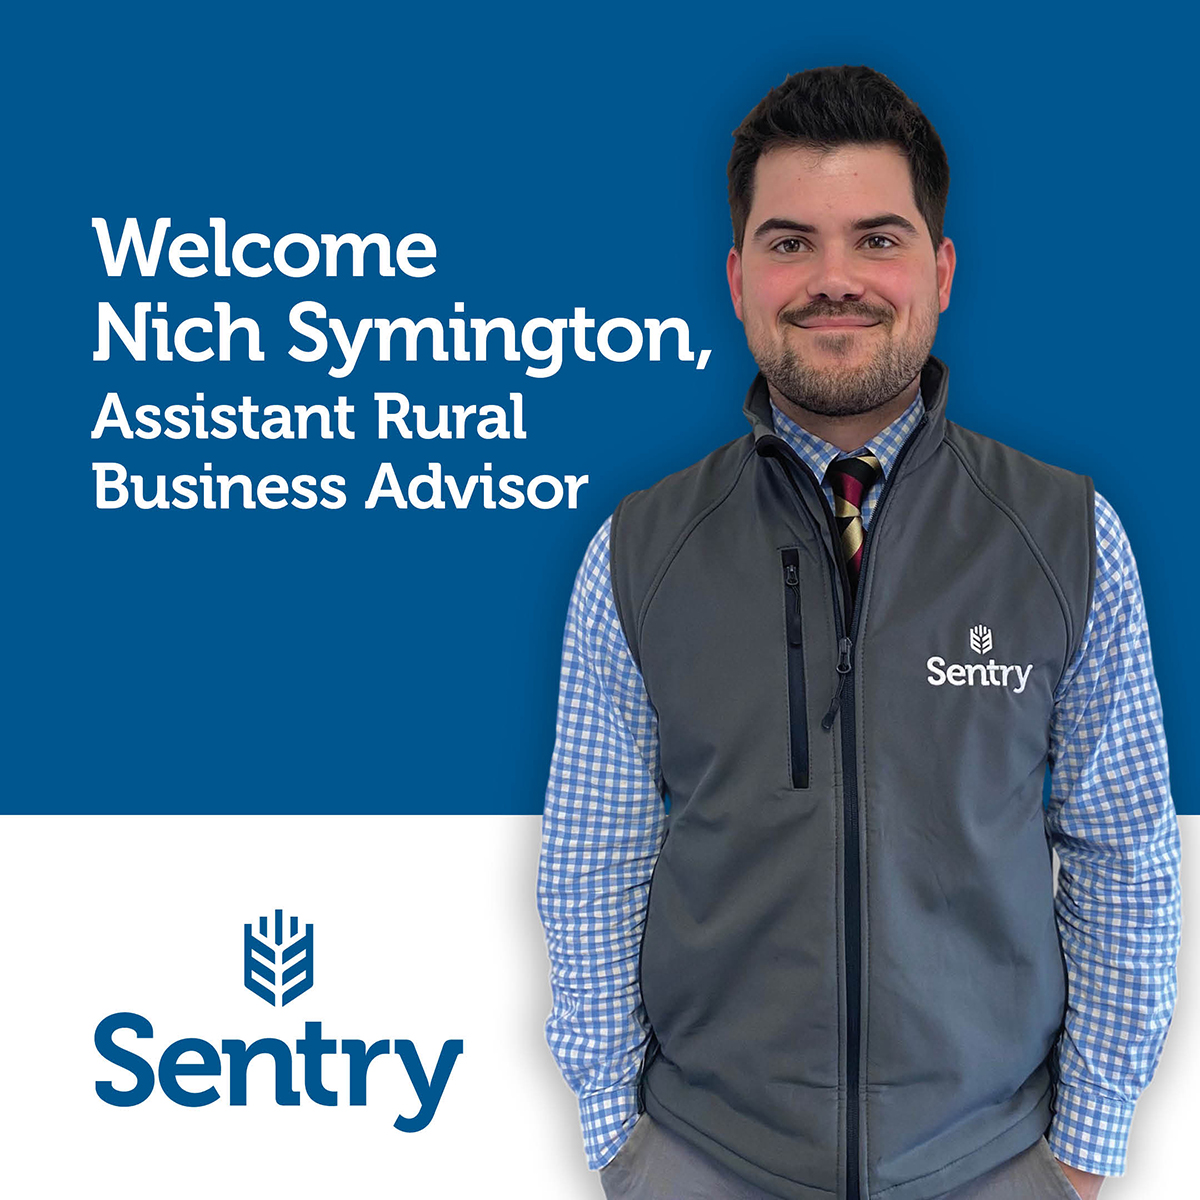 We are pleased to welcome Nicholas Symington to Sentry as our Assistant Rural Business Advisor.  With his deep-rooted passion for farming & rural business, Nich brings a wealth of experience to our business solutions team.
#WelcomeToTheTeam #EmployeeOwnership #SentryTeam